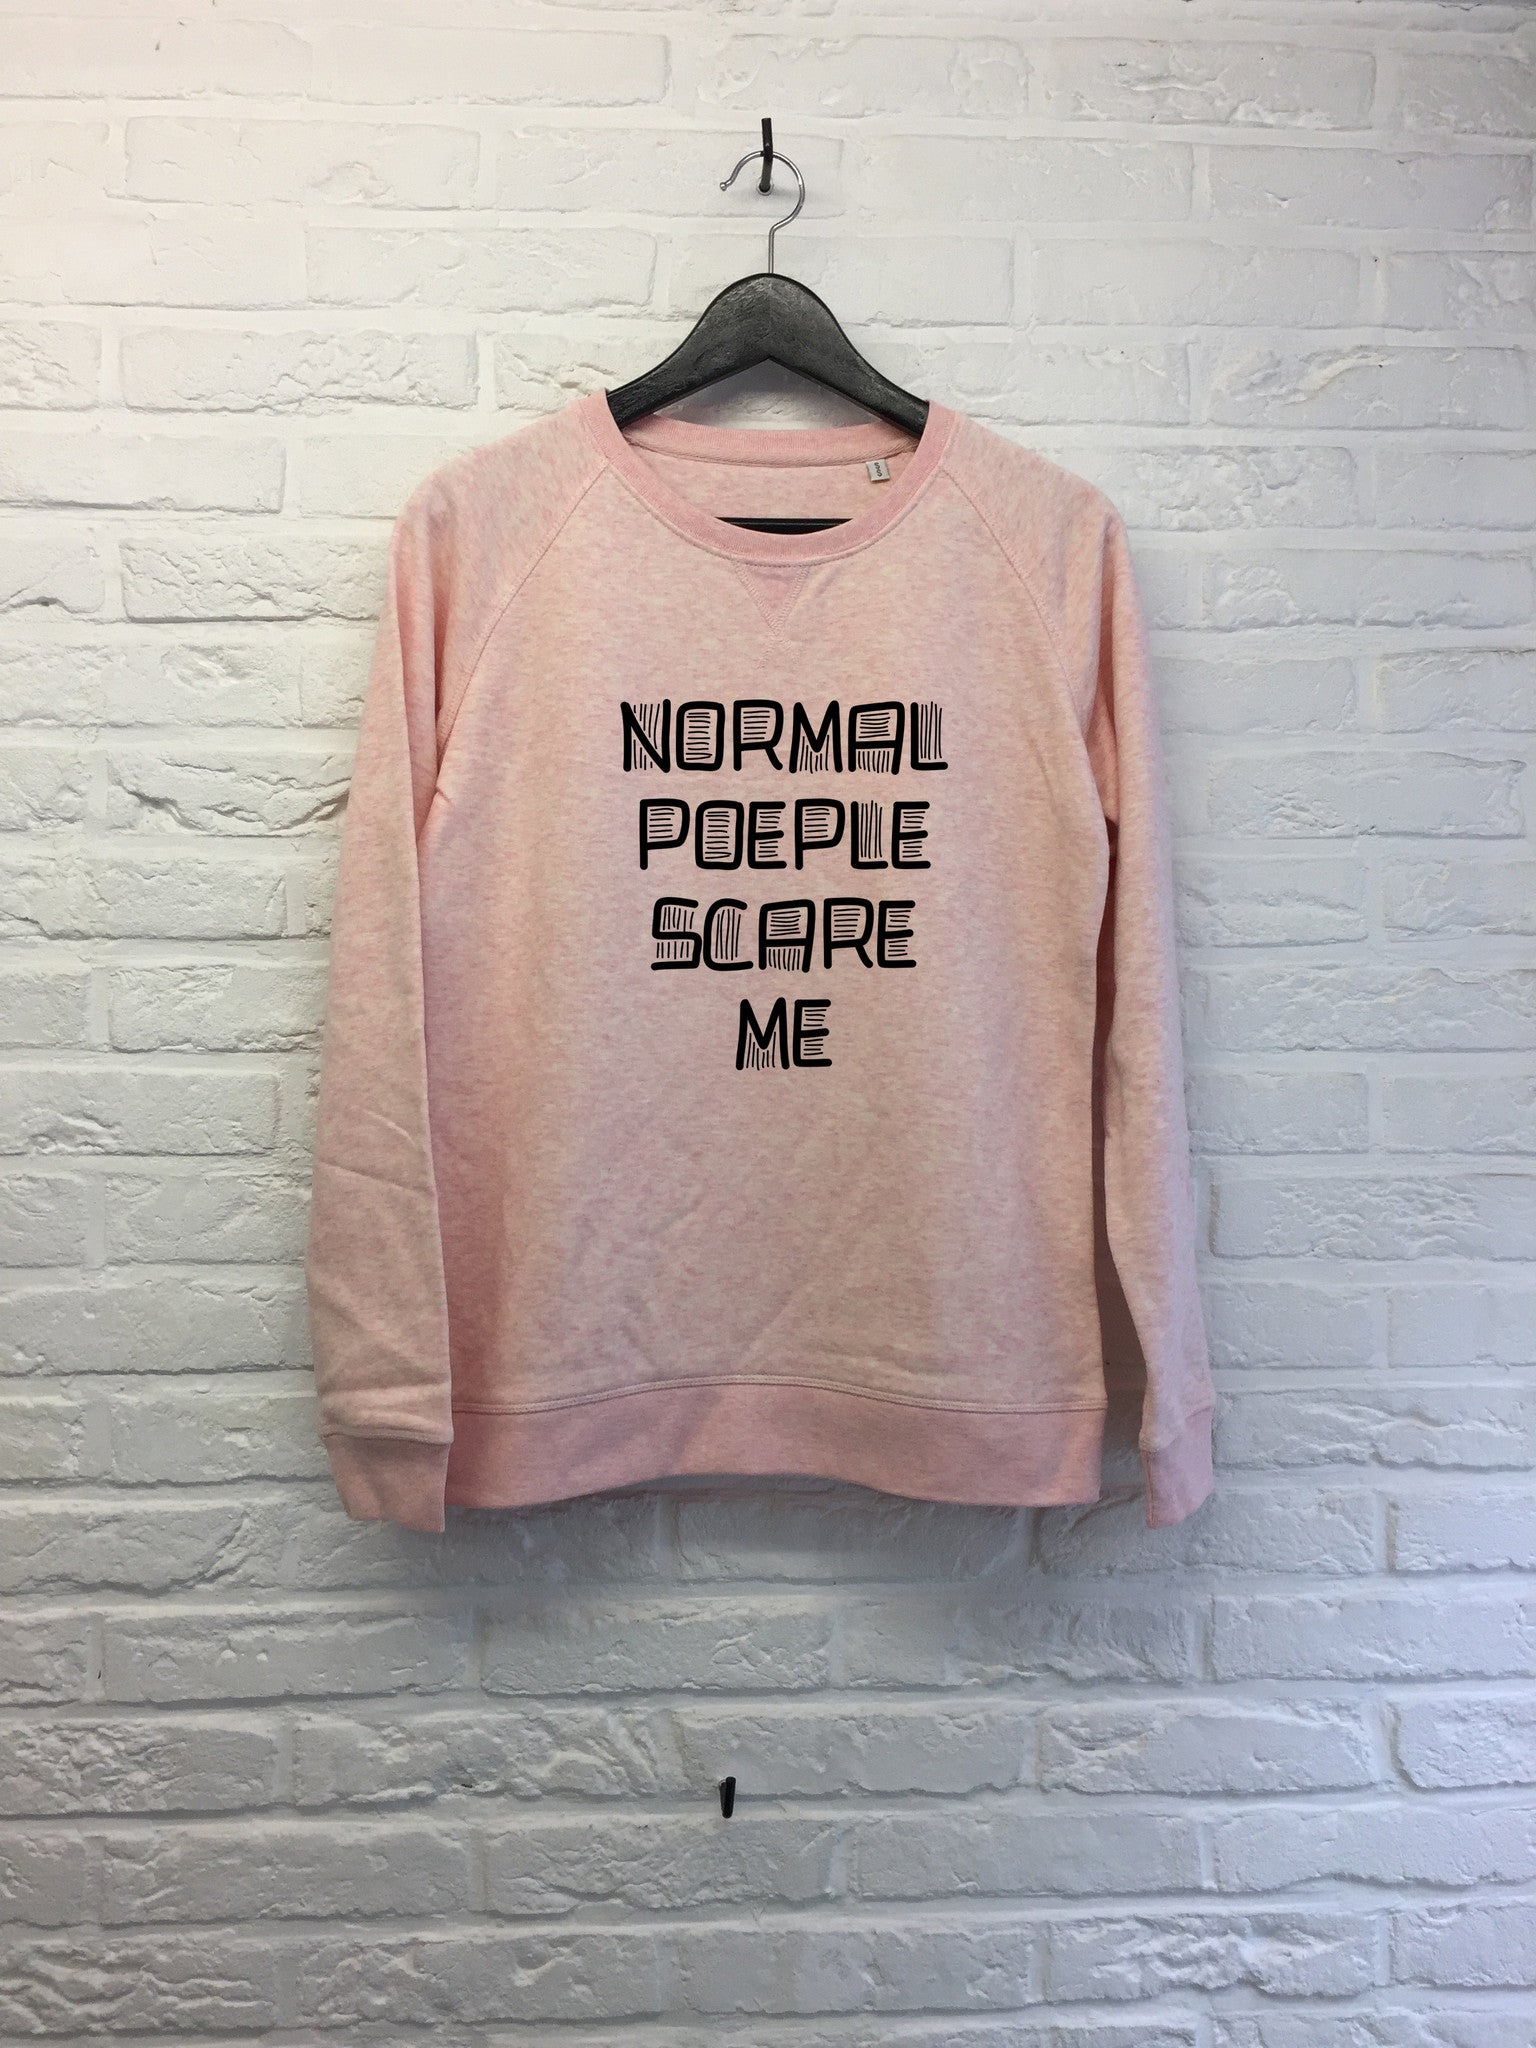 Normal people scare me - Sweat - Femme-Sweat shirts-Atelier Amelot